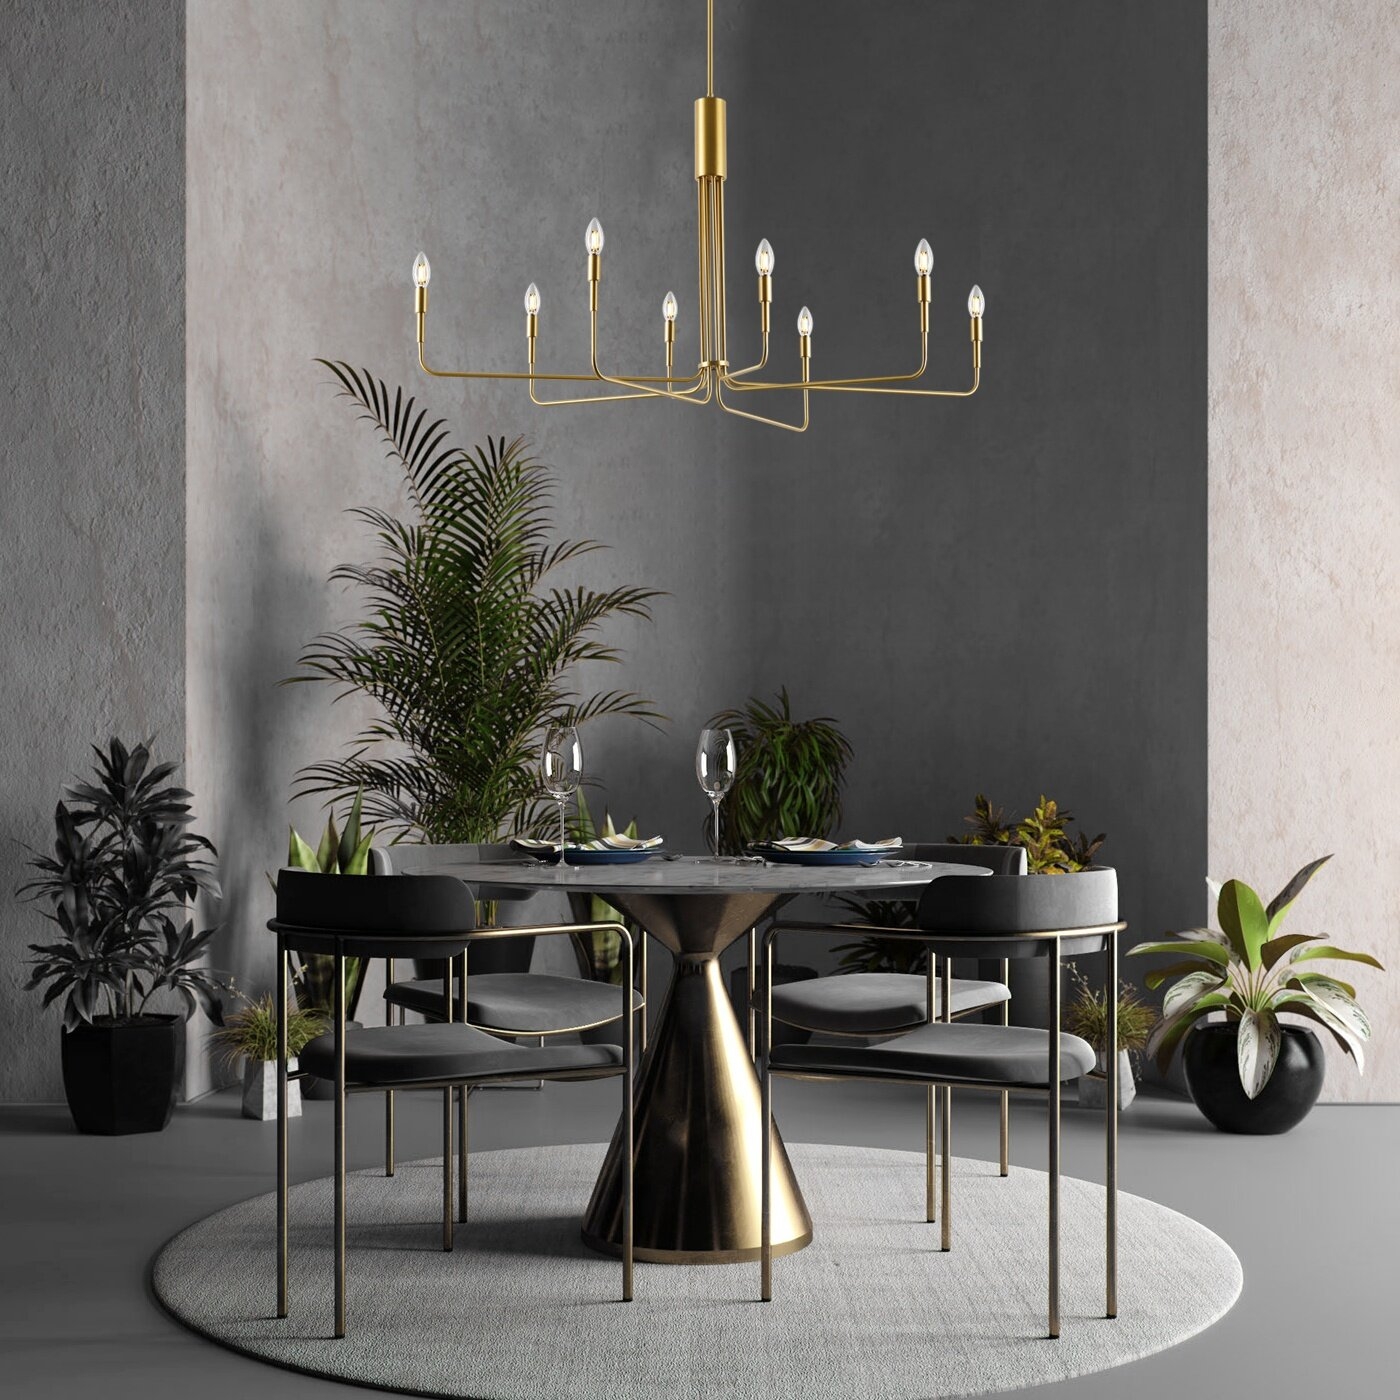 Brushed Brass Sola 8-Light Candle Style Modern Linear Chandelier, Brushed Brass - Image 1